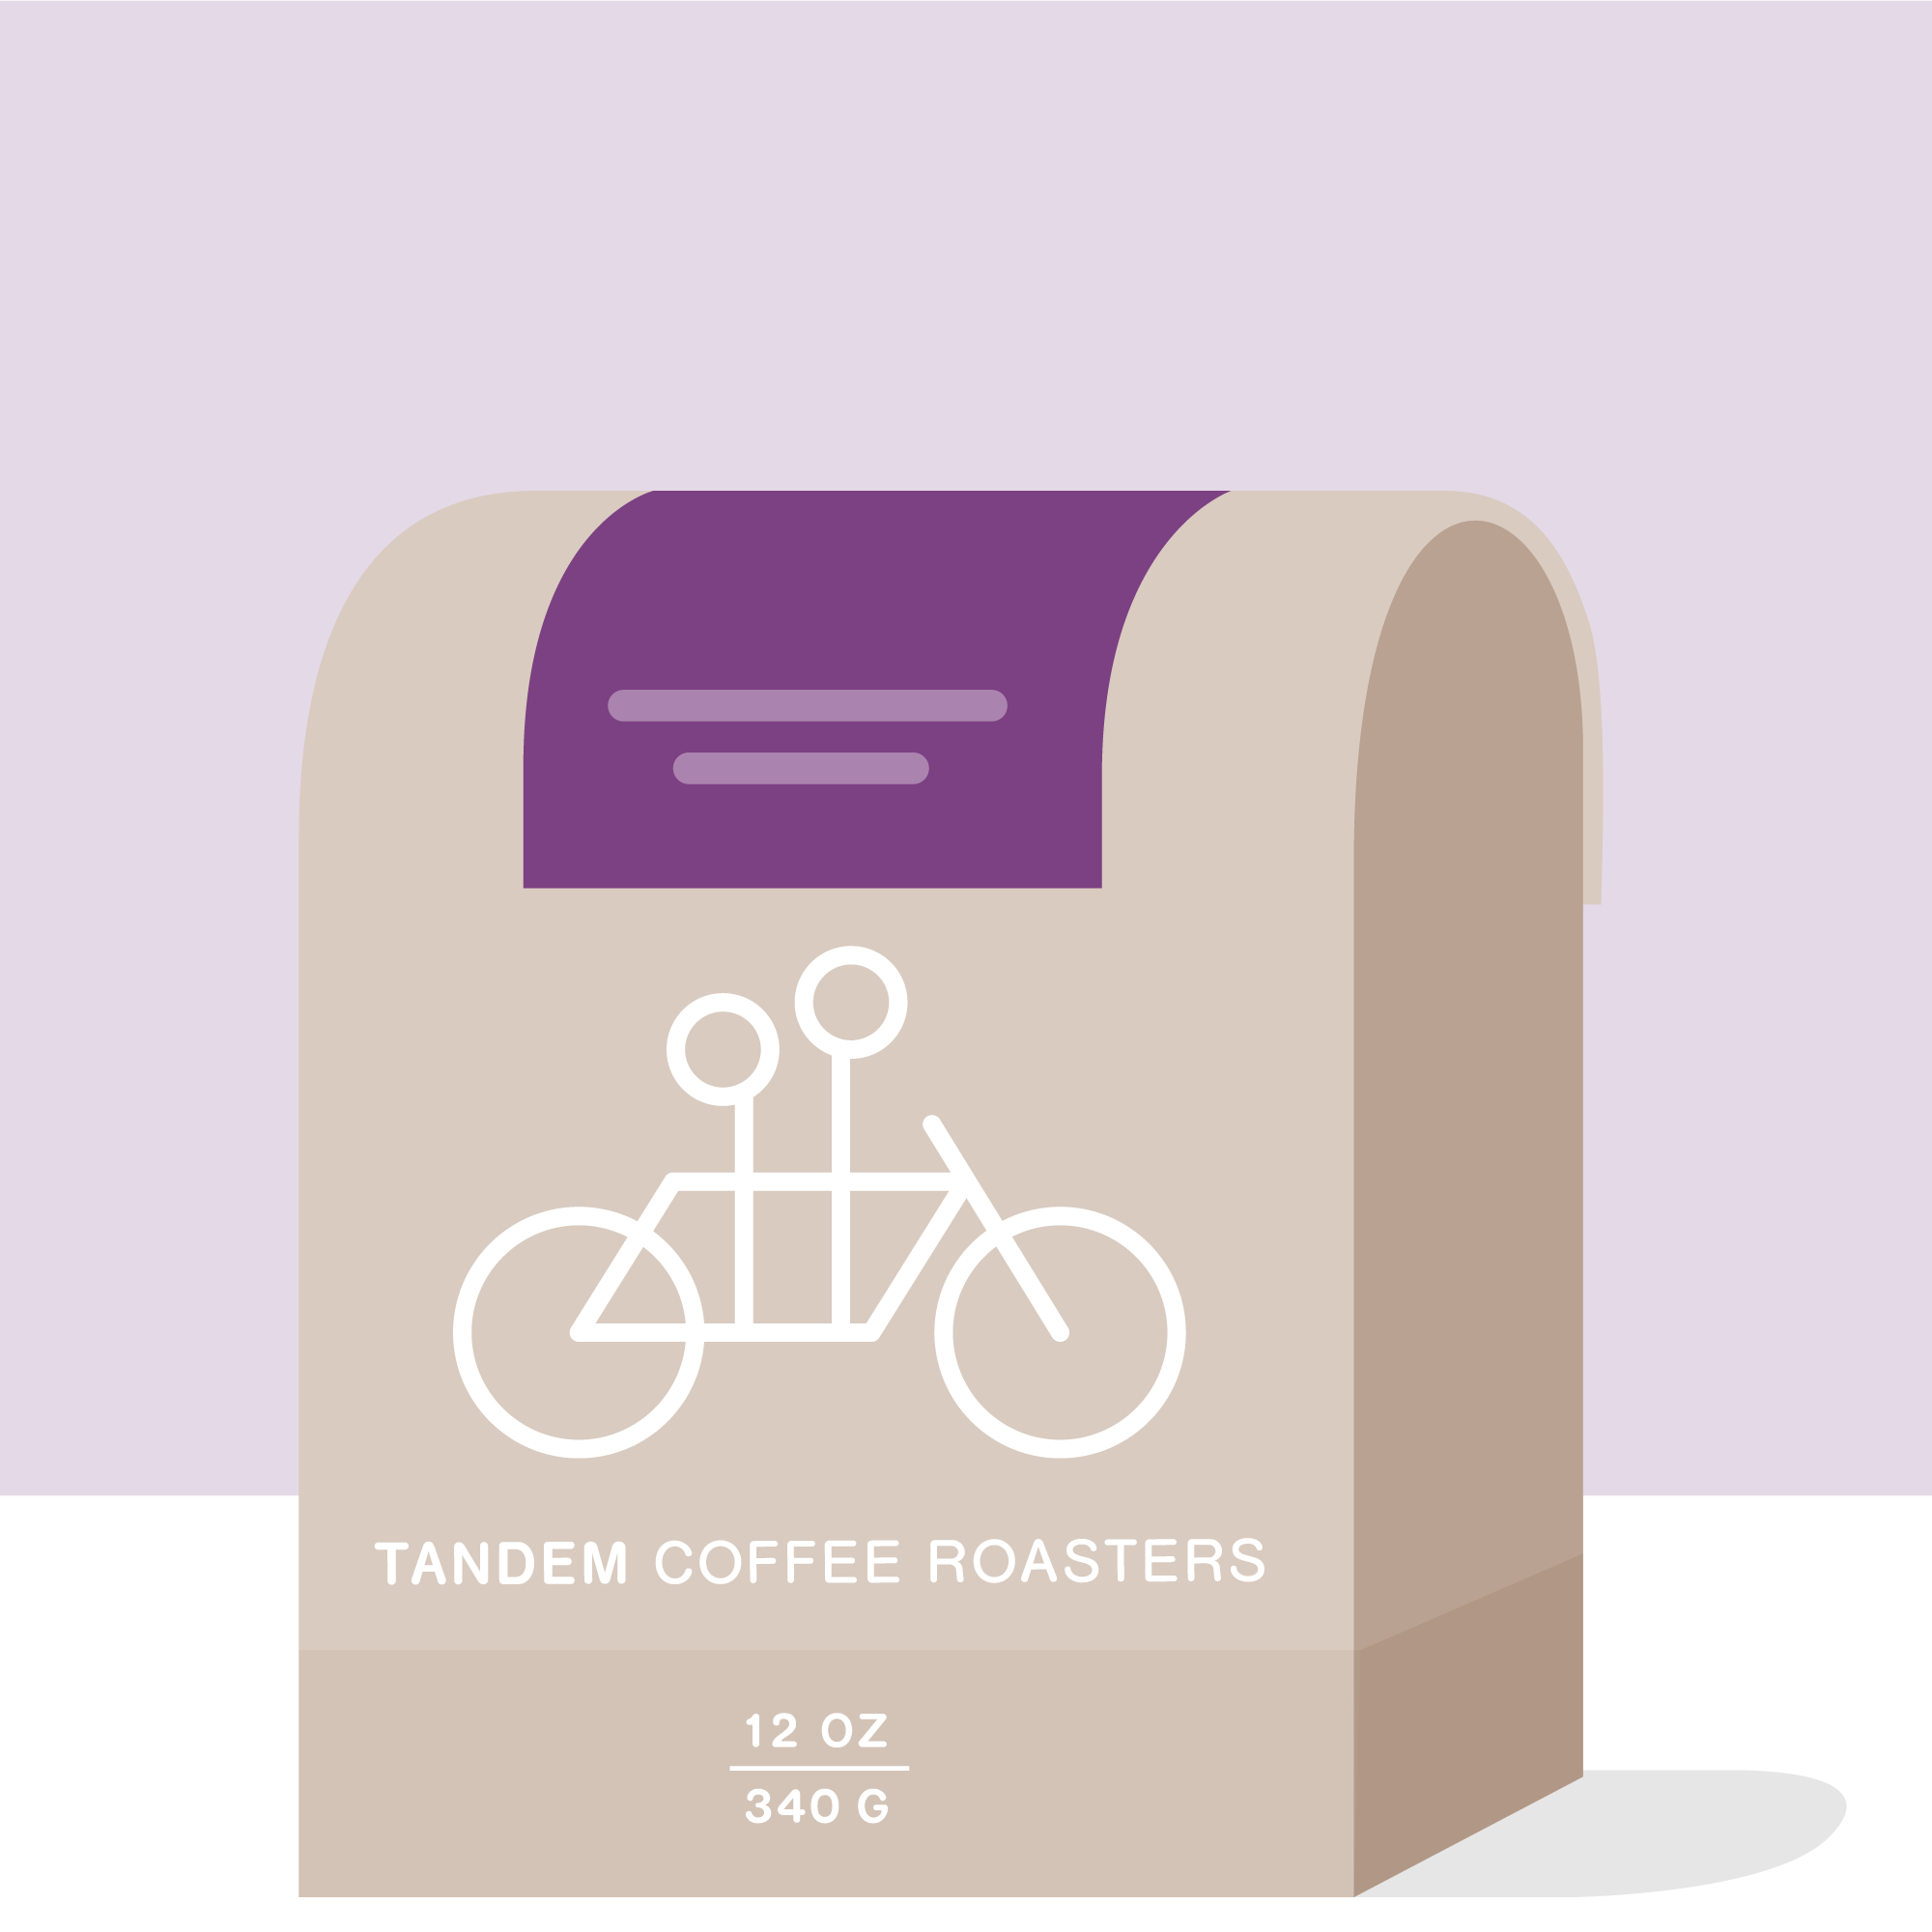 A minimalistic design featuring a beige Danche - Ethiopia takeaway coffee bag from Tandem Coffee Roasters, with "SNAP Specialty Coffee" and a tandem bicycle logo on it, set against a rich purple background. The bag also displays a 12 oz